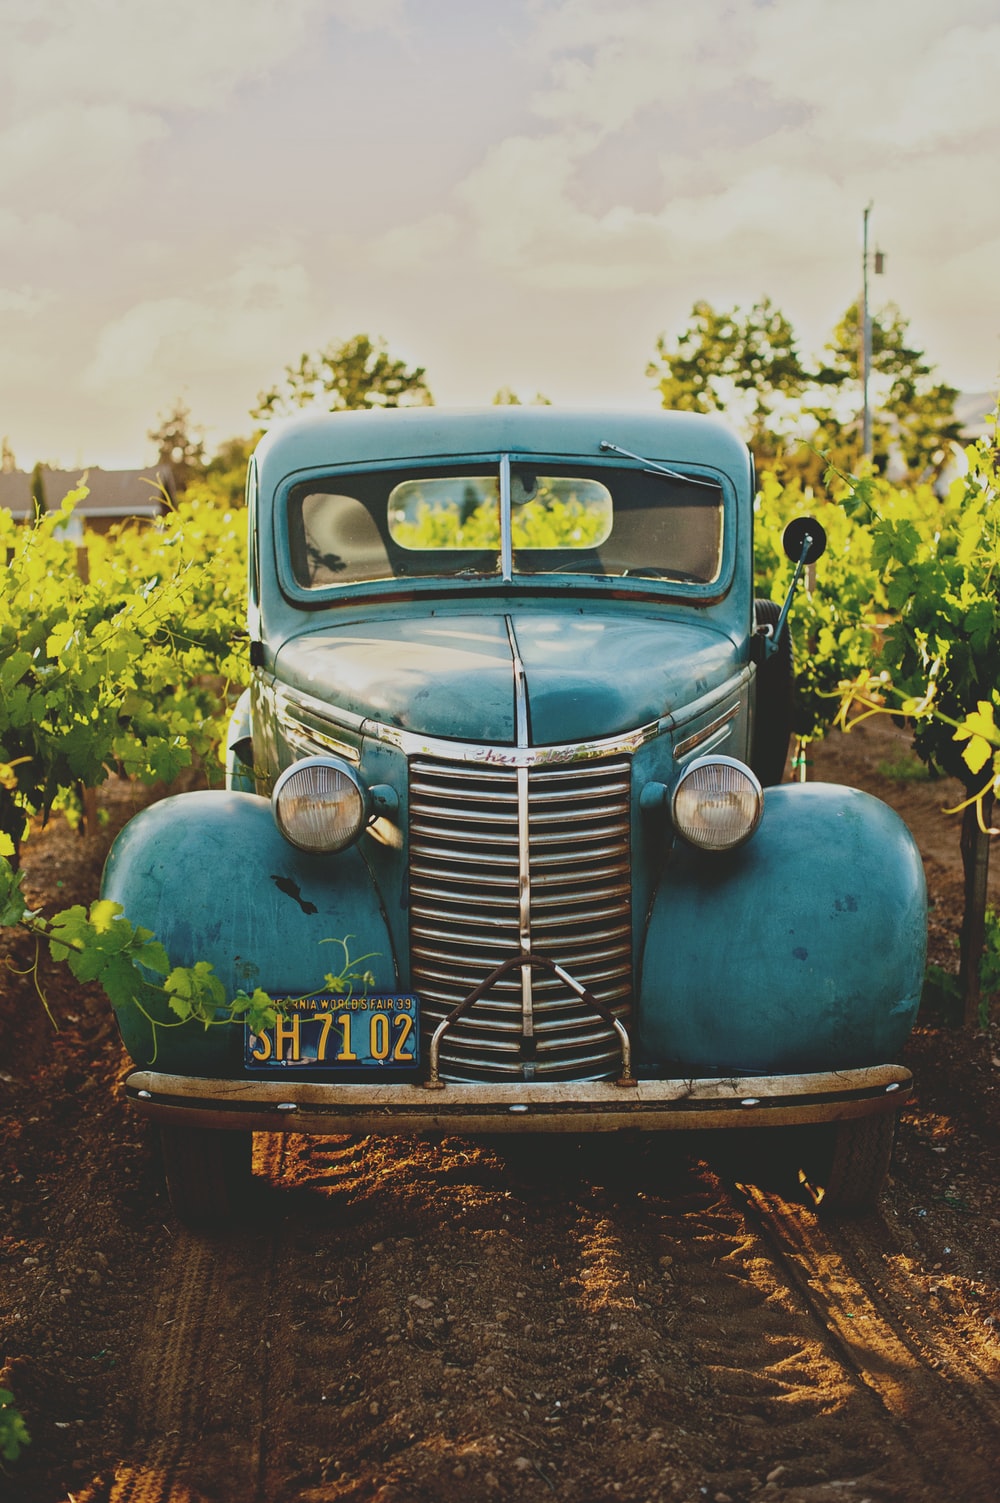 Farm Truck Picture. Download Free Image